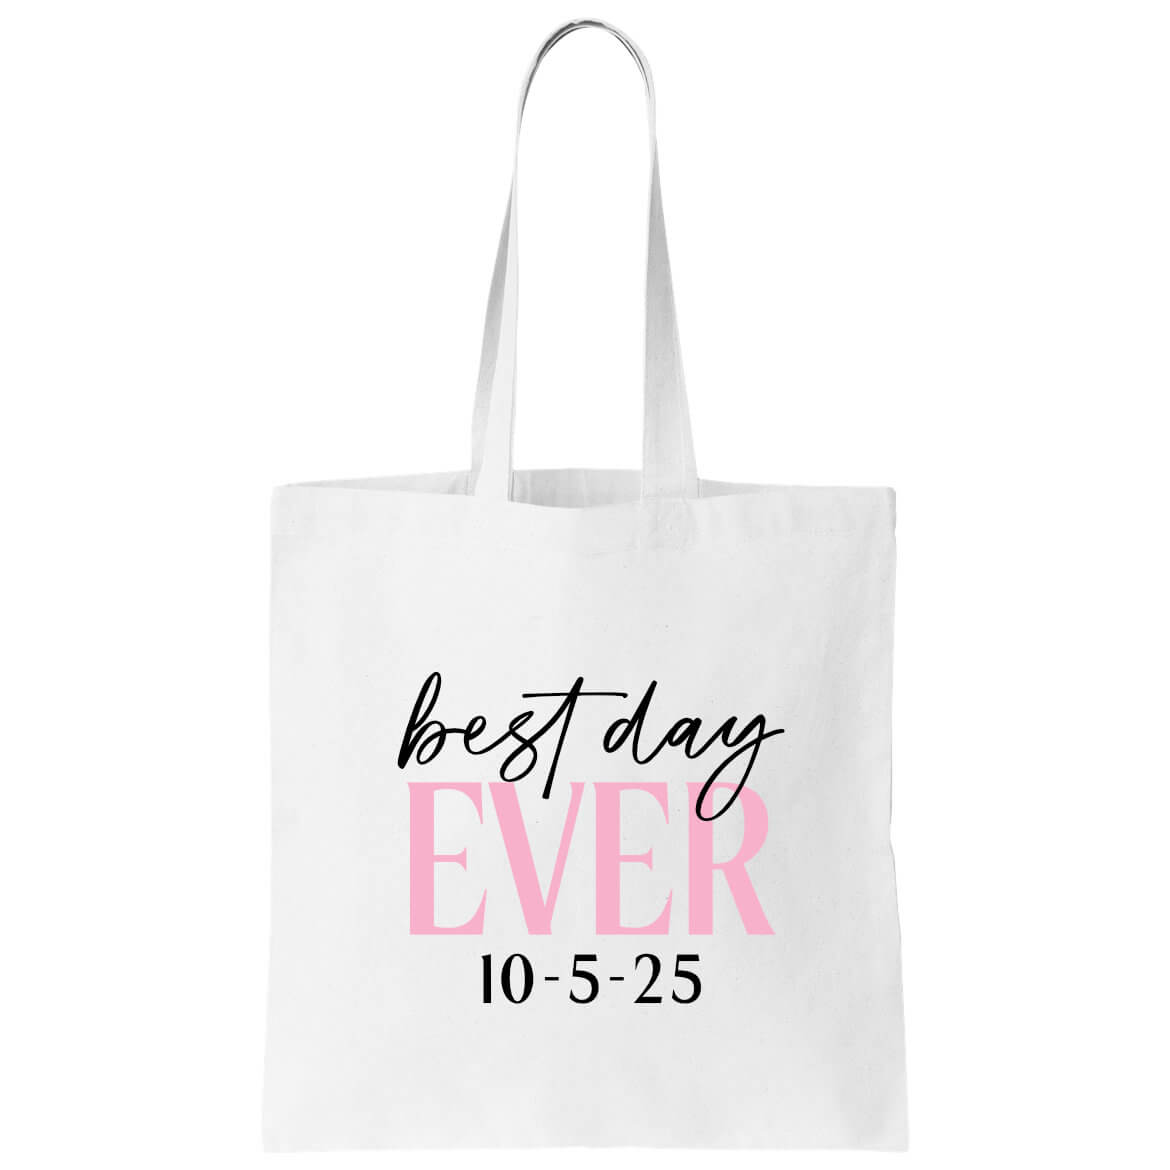 Best Day Ever Personalized Shopping Bag